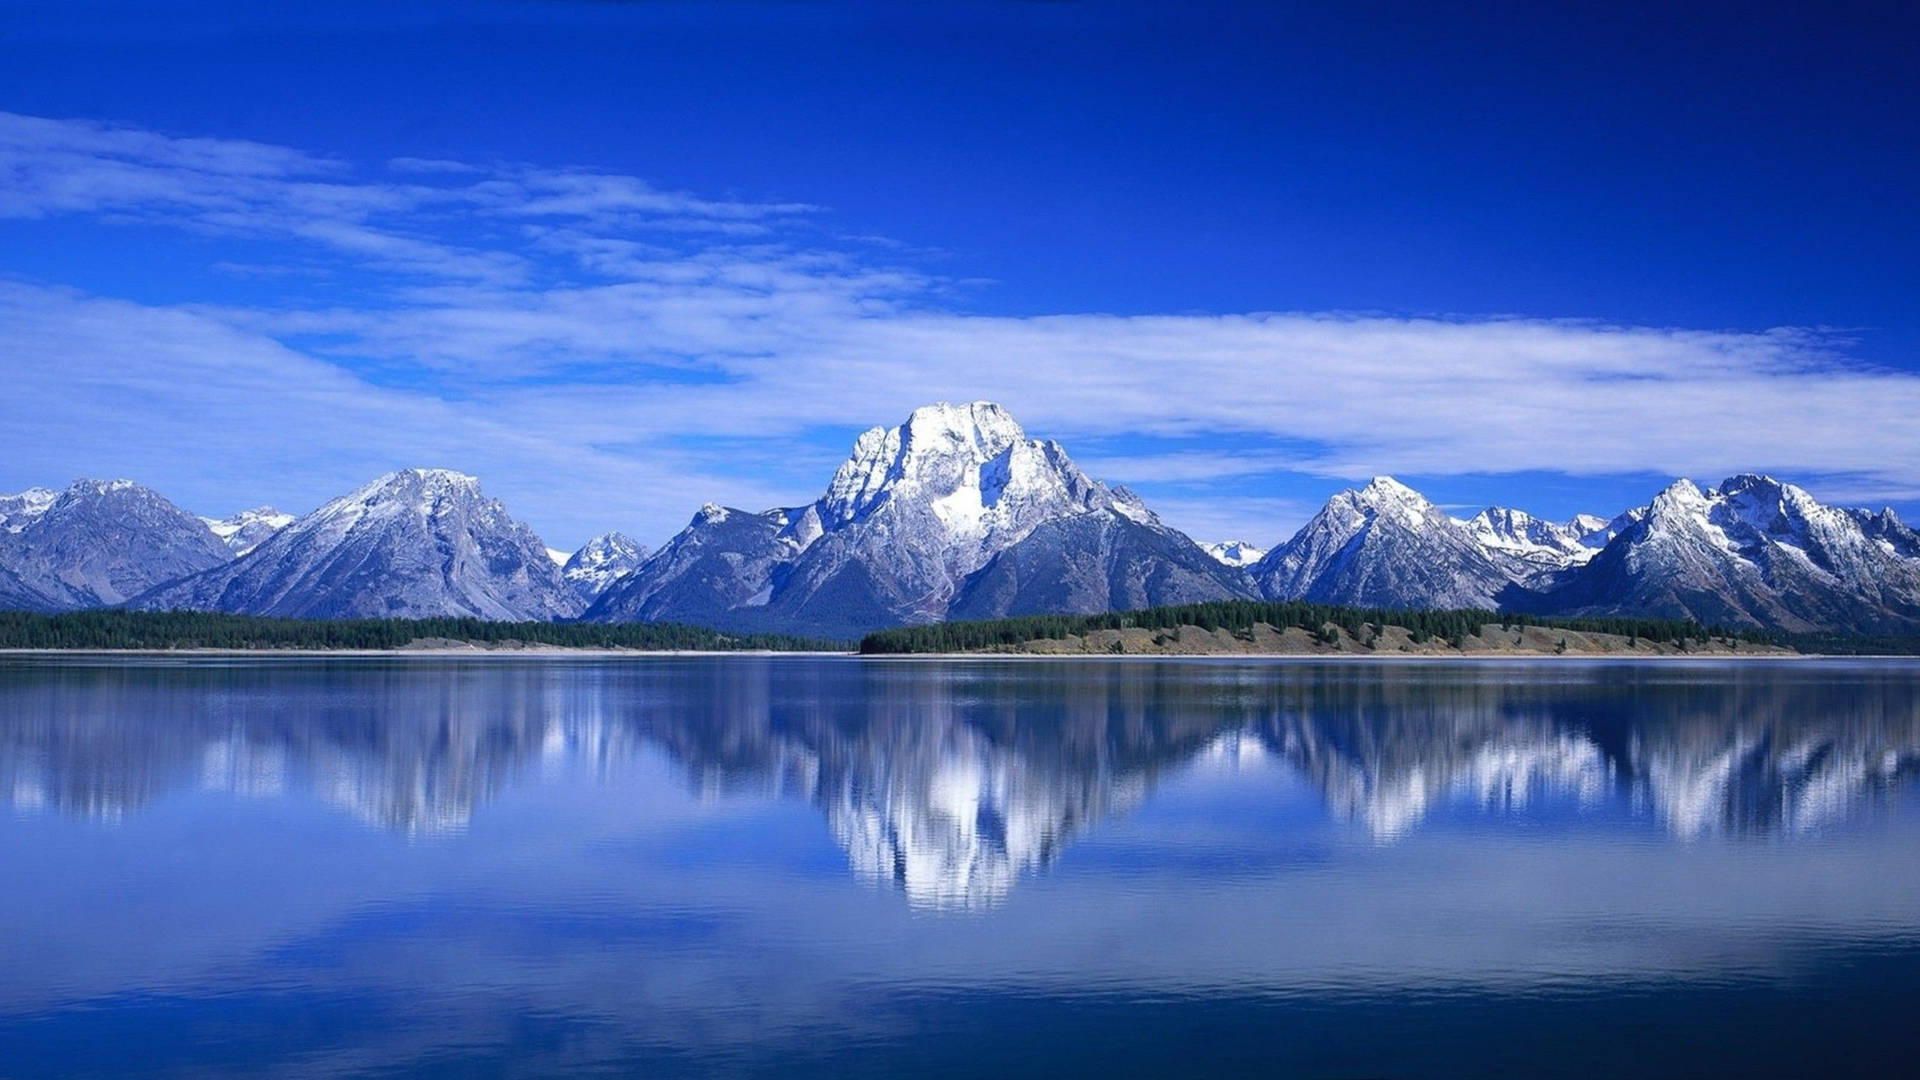 1440p Hd Mountain On Clear Lake Background